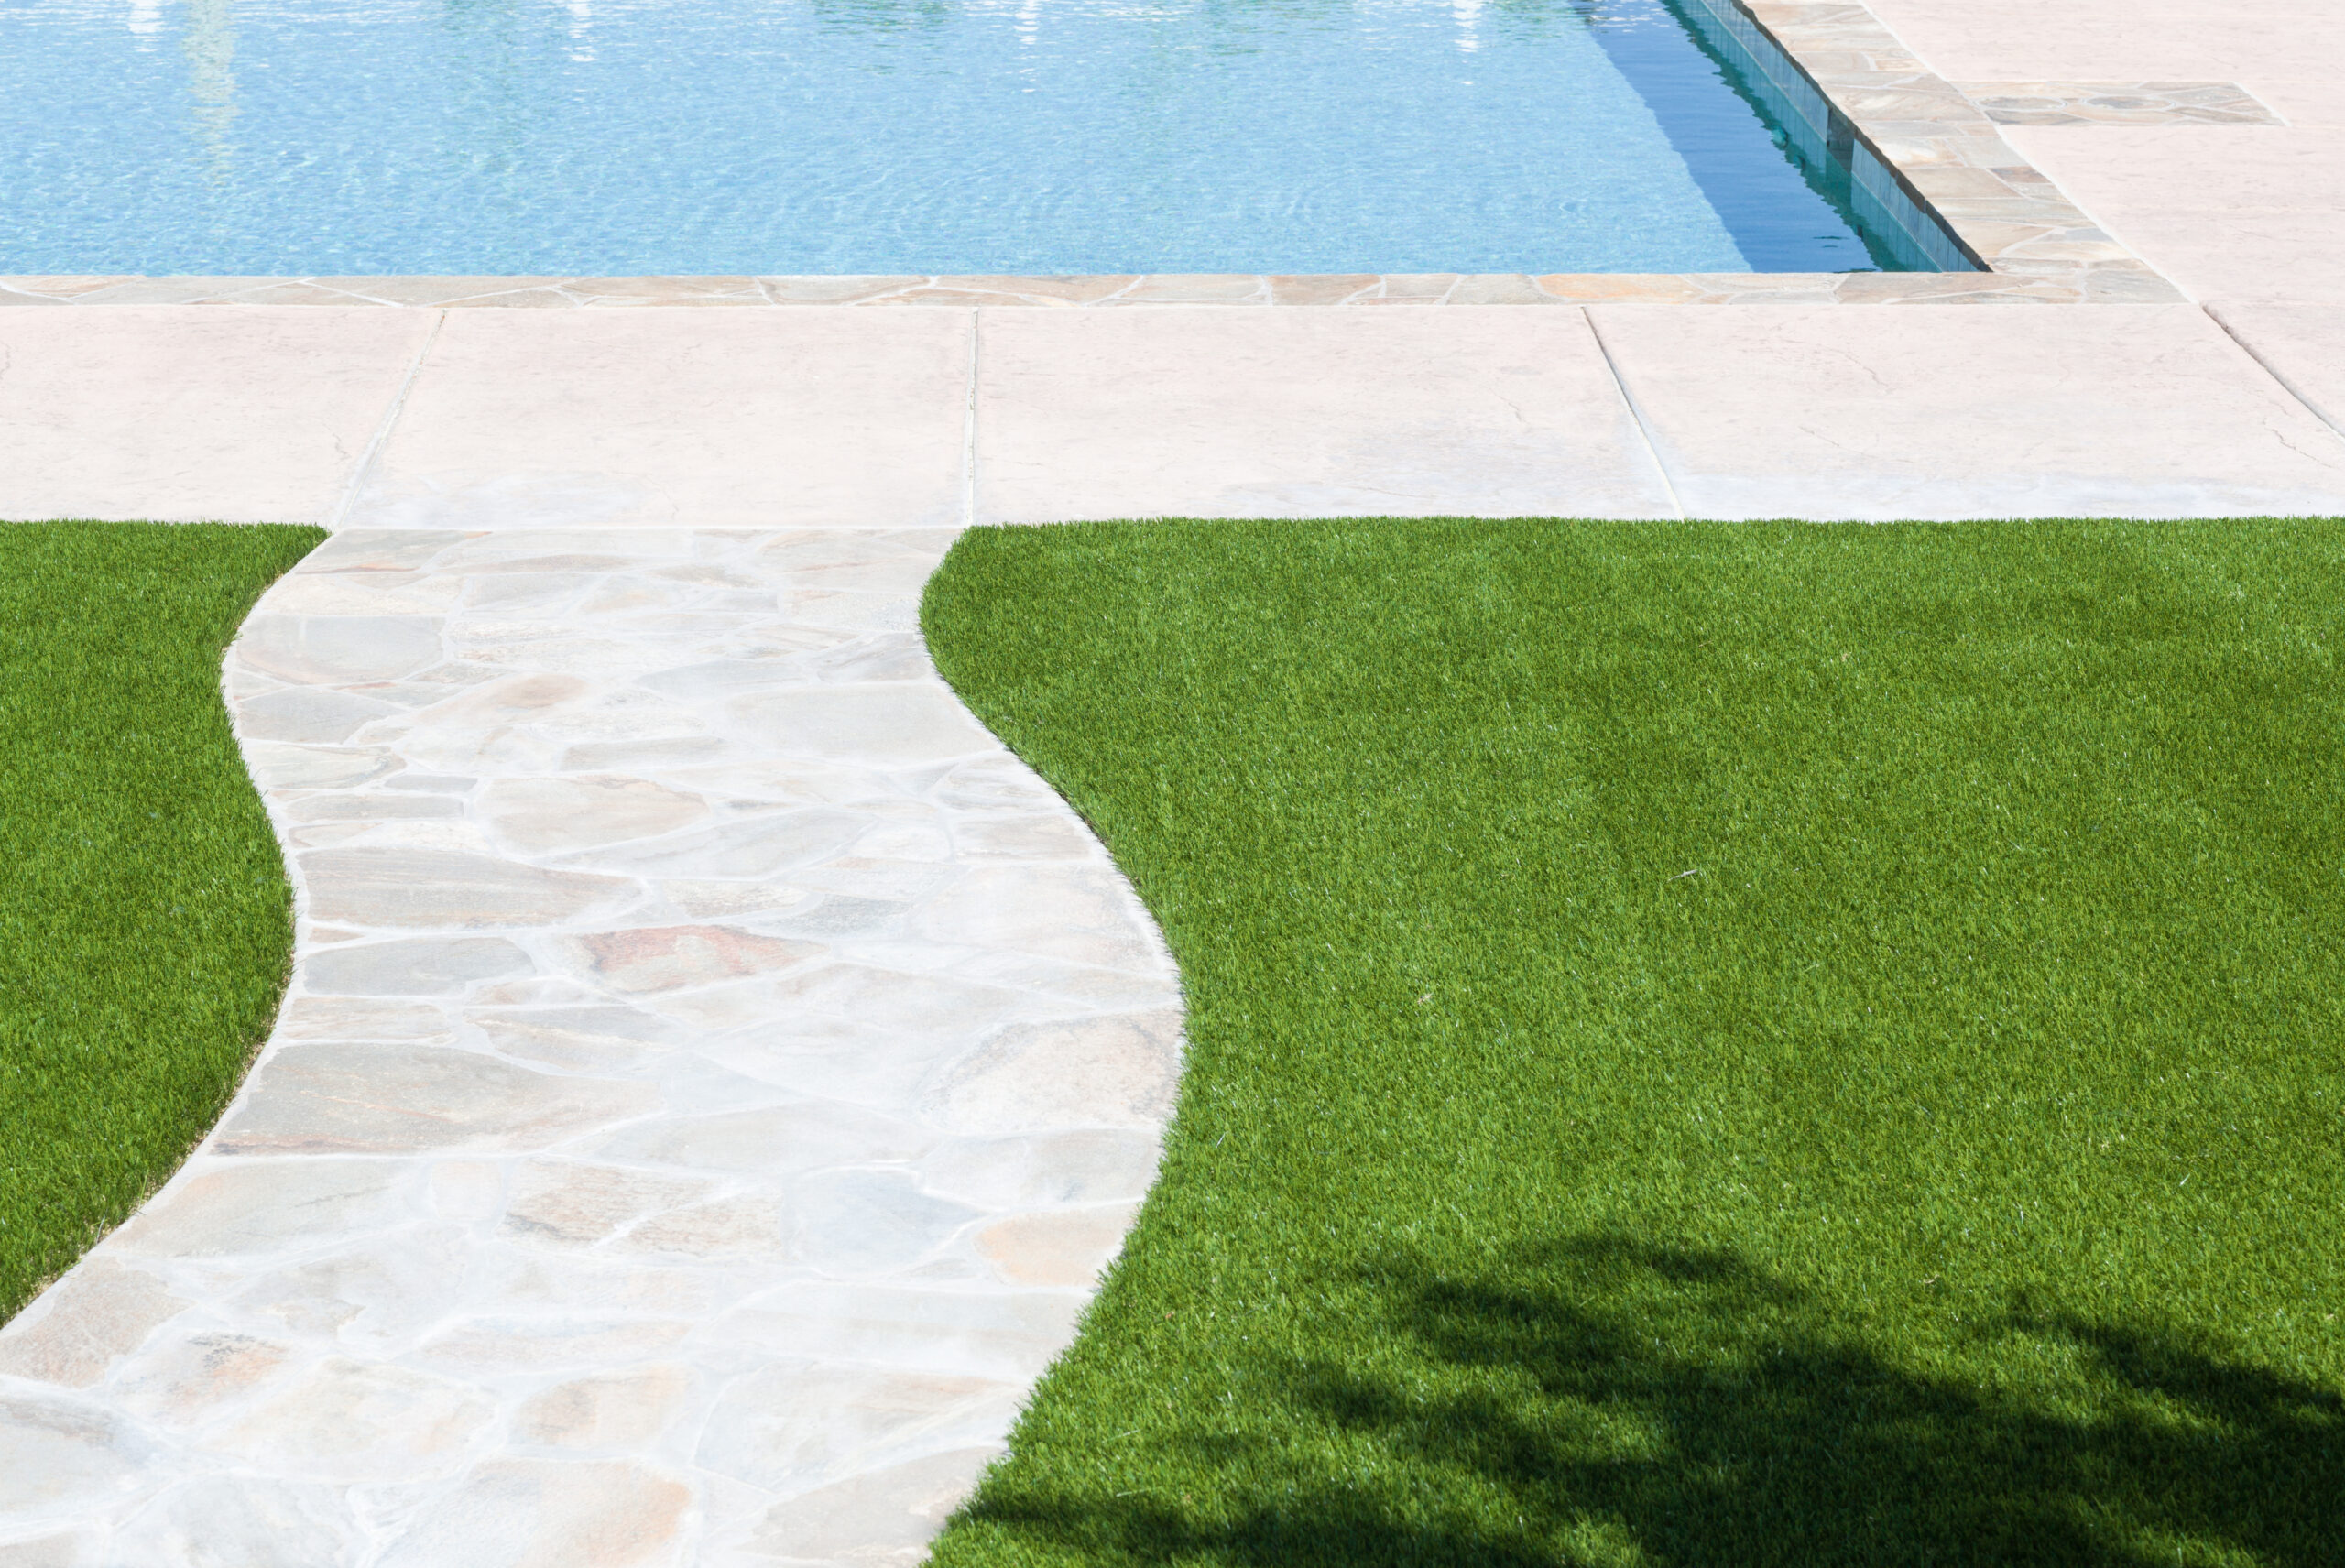 new-artificial-grass-installed-near-walkway-and-pool-stockpack-adobe-stock.jpg